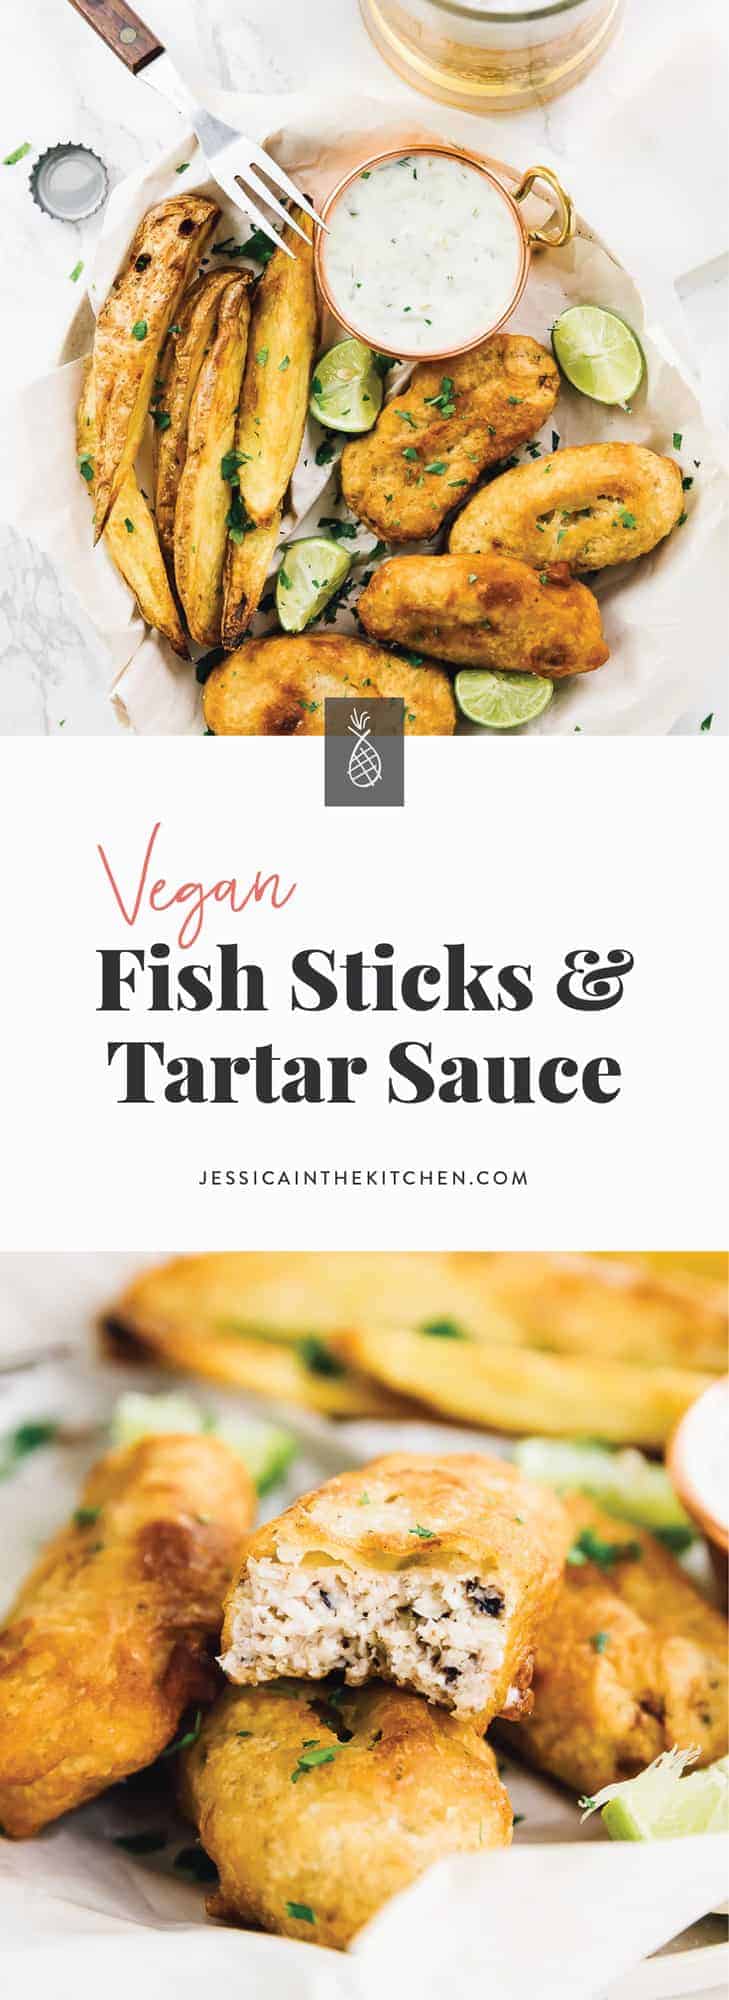 These Vegan Fish Sticks are so unbelievably divine! They are beer-battered, have an amazing texture and are served with a homemade vegan tartar sauce! via https://jessicainthekitchen.com 